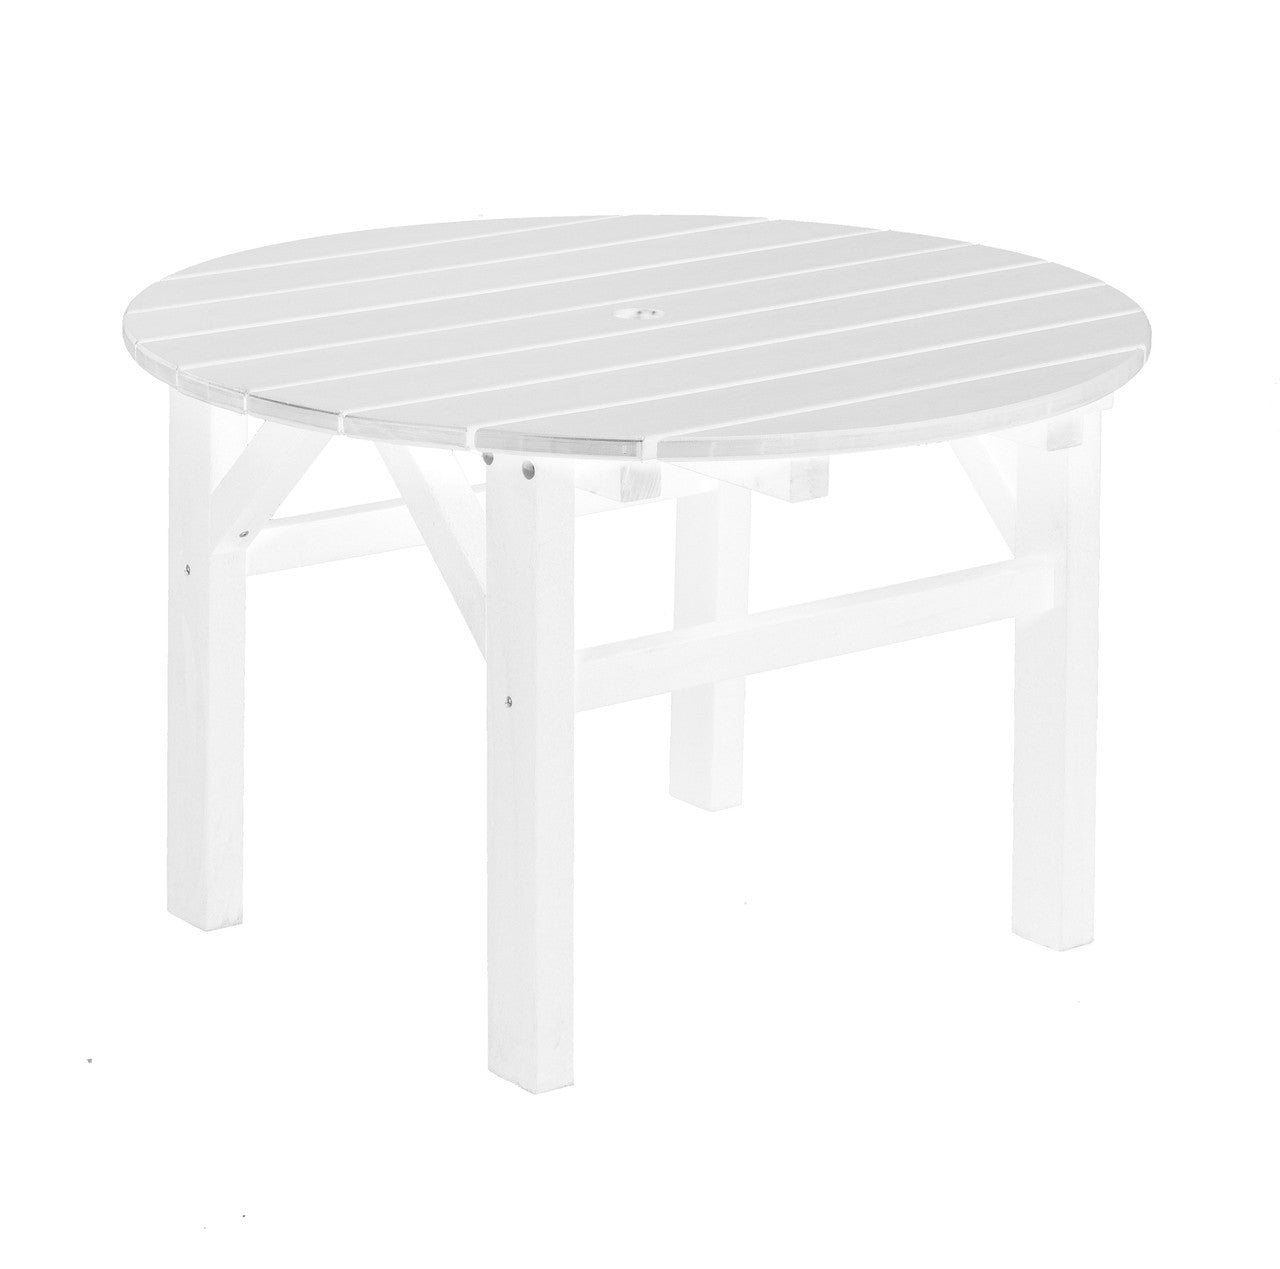 Wildridge Classic Poly-Lumber 33" Occassional Table